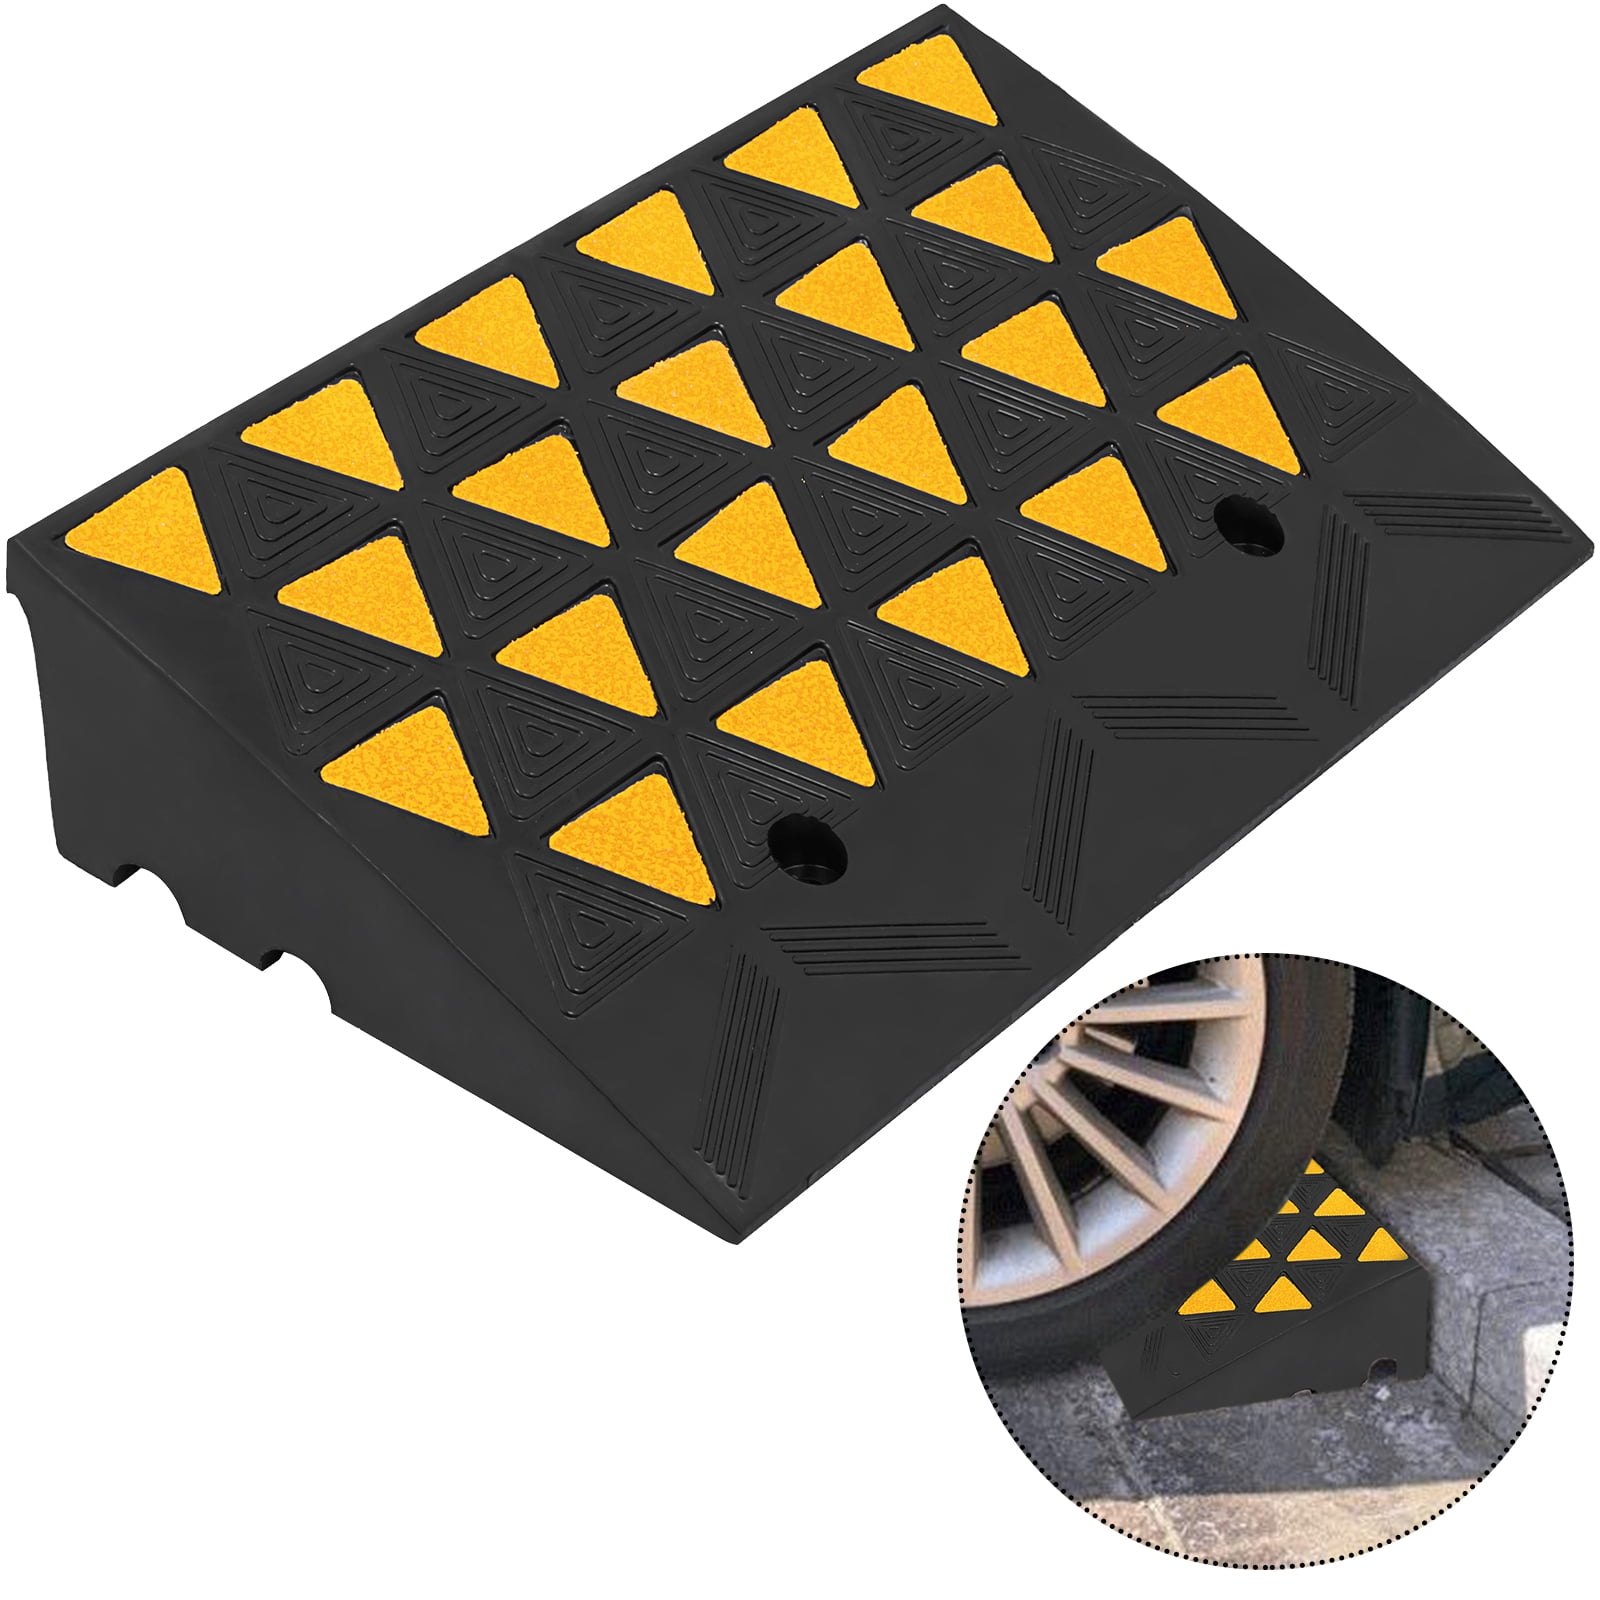 Parking Lot Entrance Curb Ramps Sturdy Durable Truck Ramps Home Use Step Mat Kerb Ramps 11 way bike CSQ-Ramps 4-11CM Multiple Heights Vehicle Ramps Color : Black, Size : 100256CM 